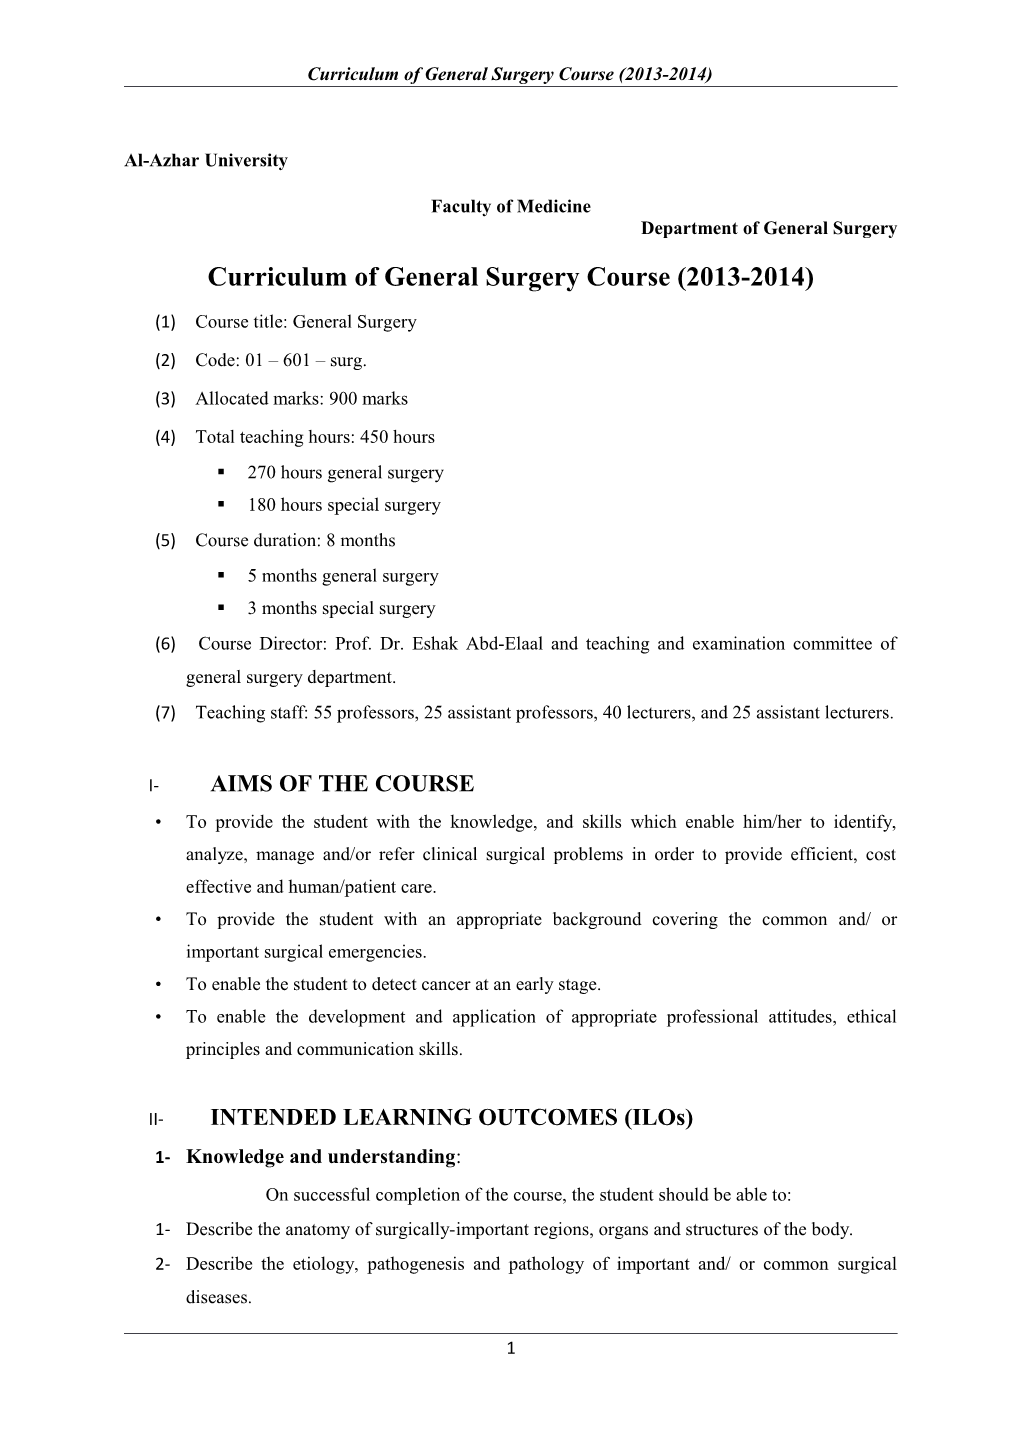 Curriculum of General Surgery Course (2013-2014)